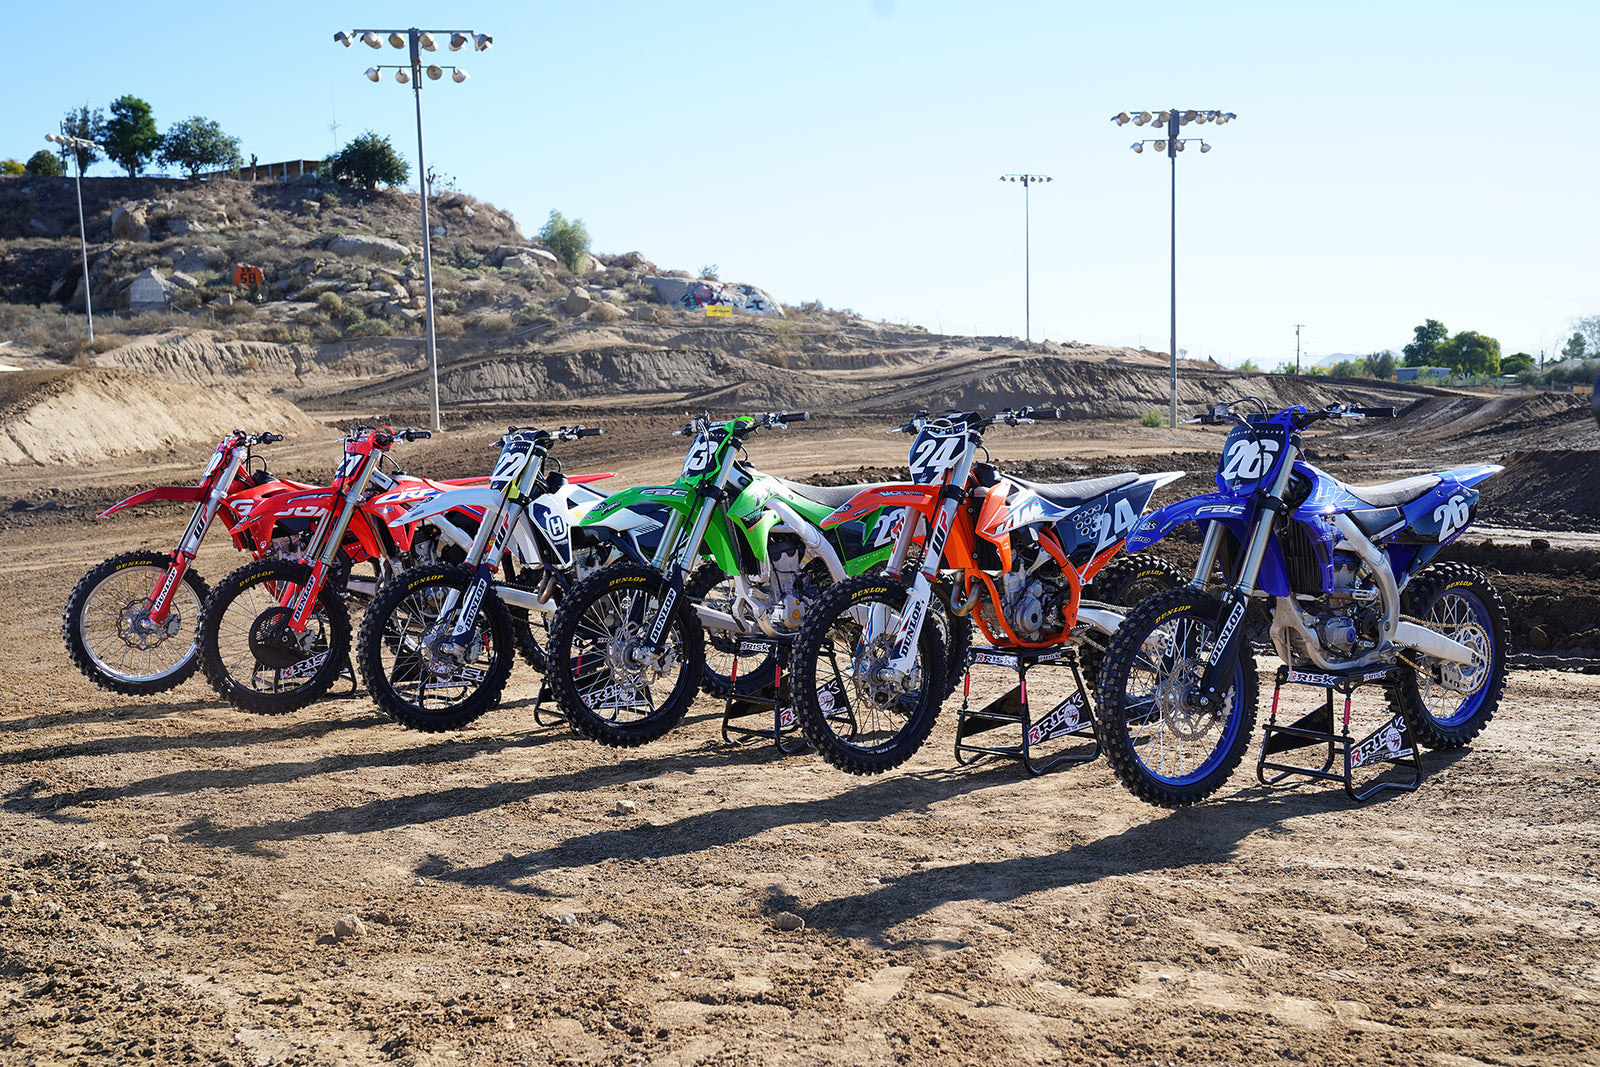 What Are the Ten Main Brands Of Dirt Bikes?